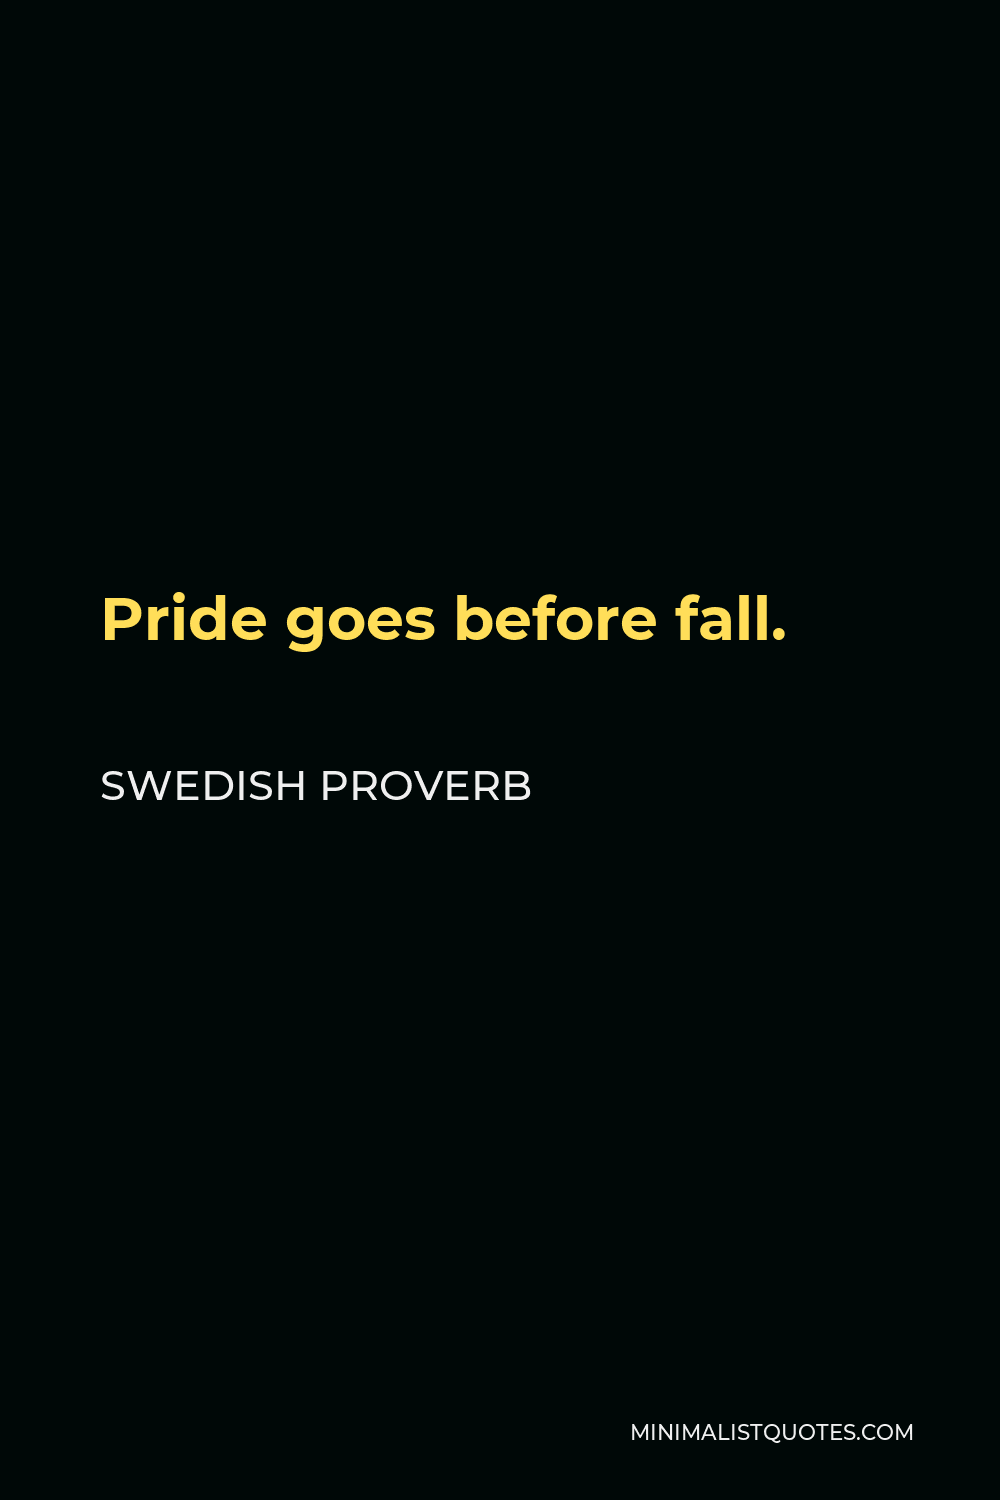 Swedish Proverb Quote - Pride goes before fall.